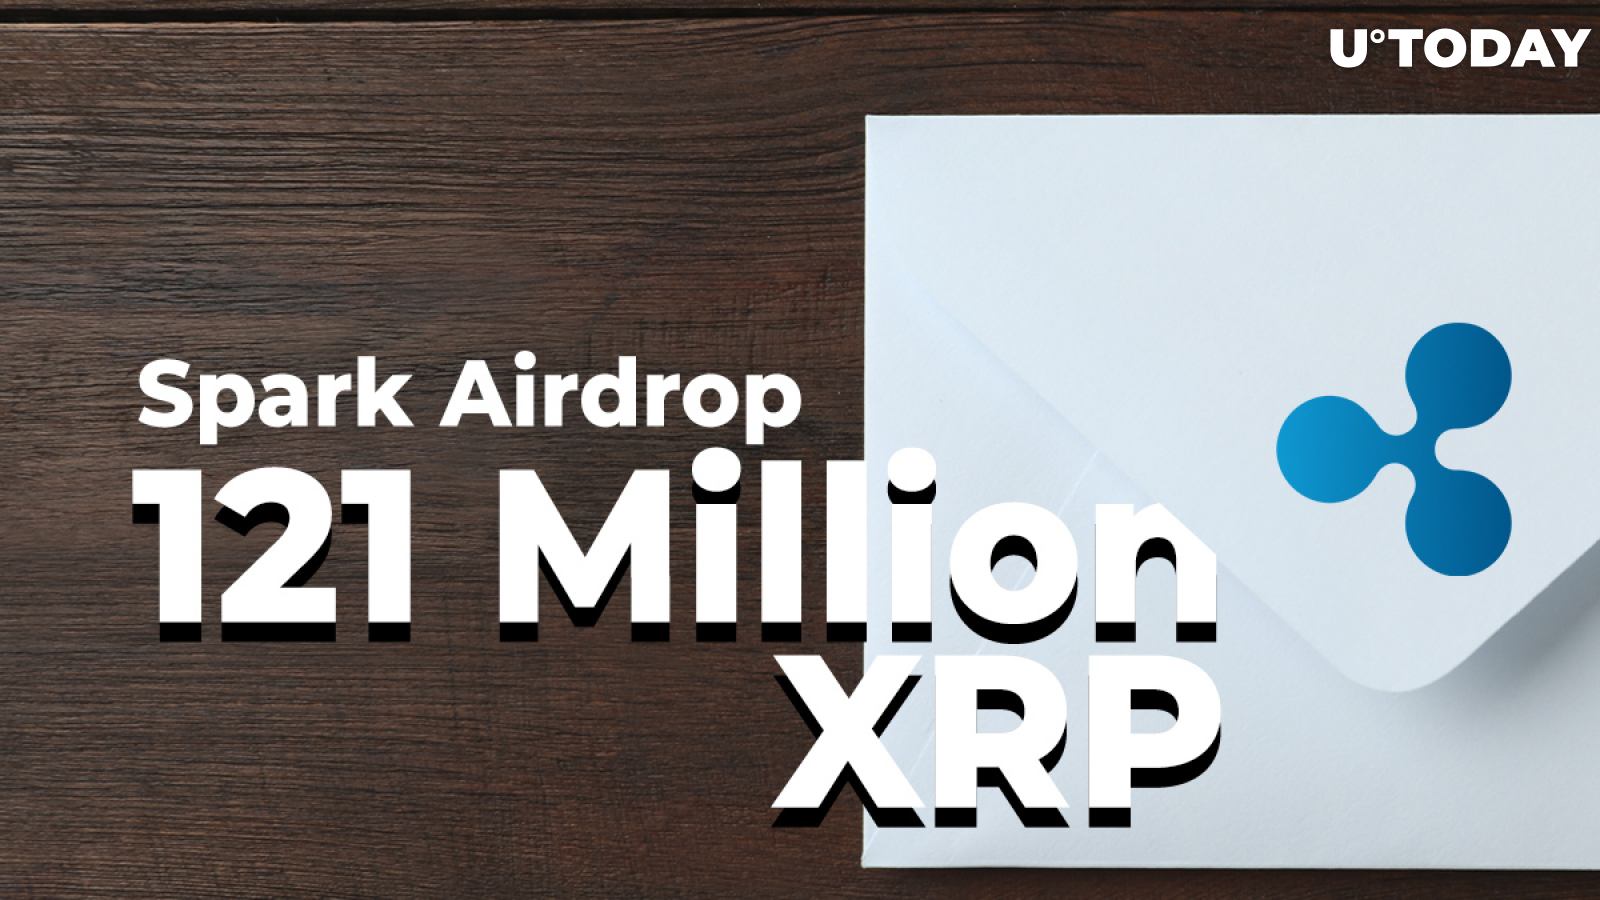 Ripple Moves 121 Million XRP Along with Top-Line Spark Airdrop Supporting Exchanges